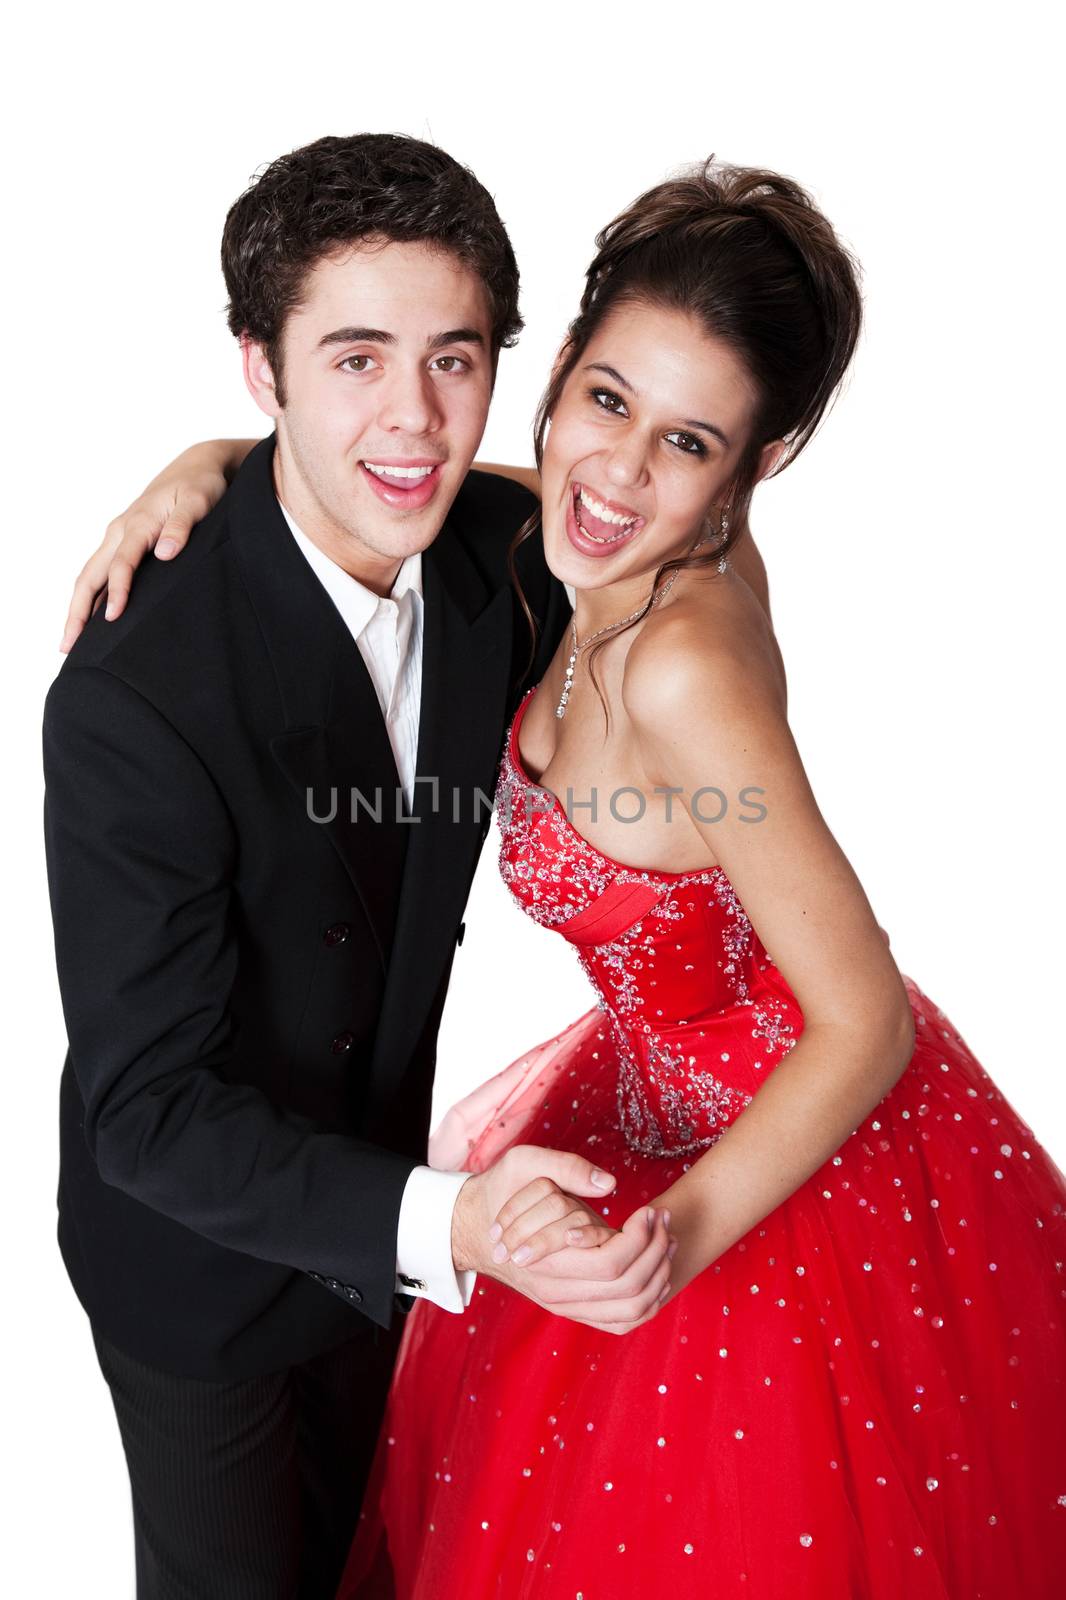 Boy and girl, in formal attire, dancing at their high school prom.